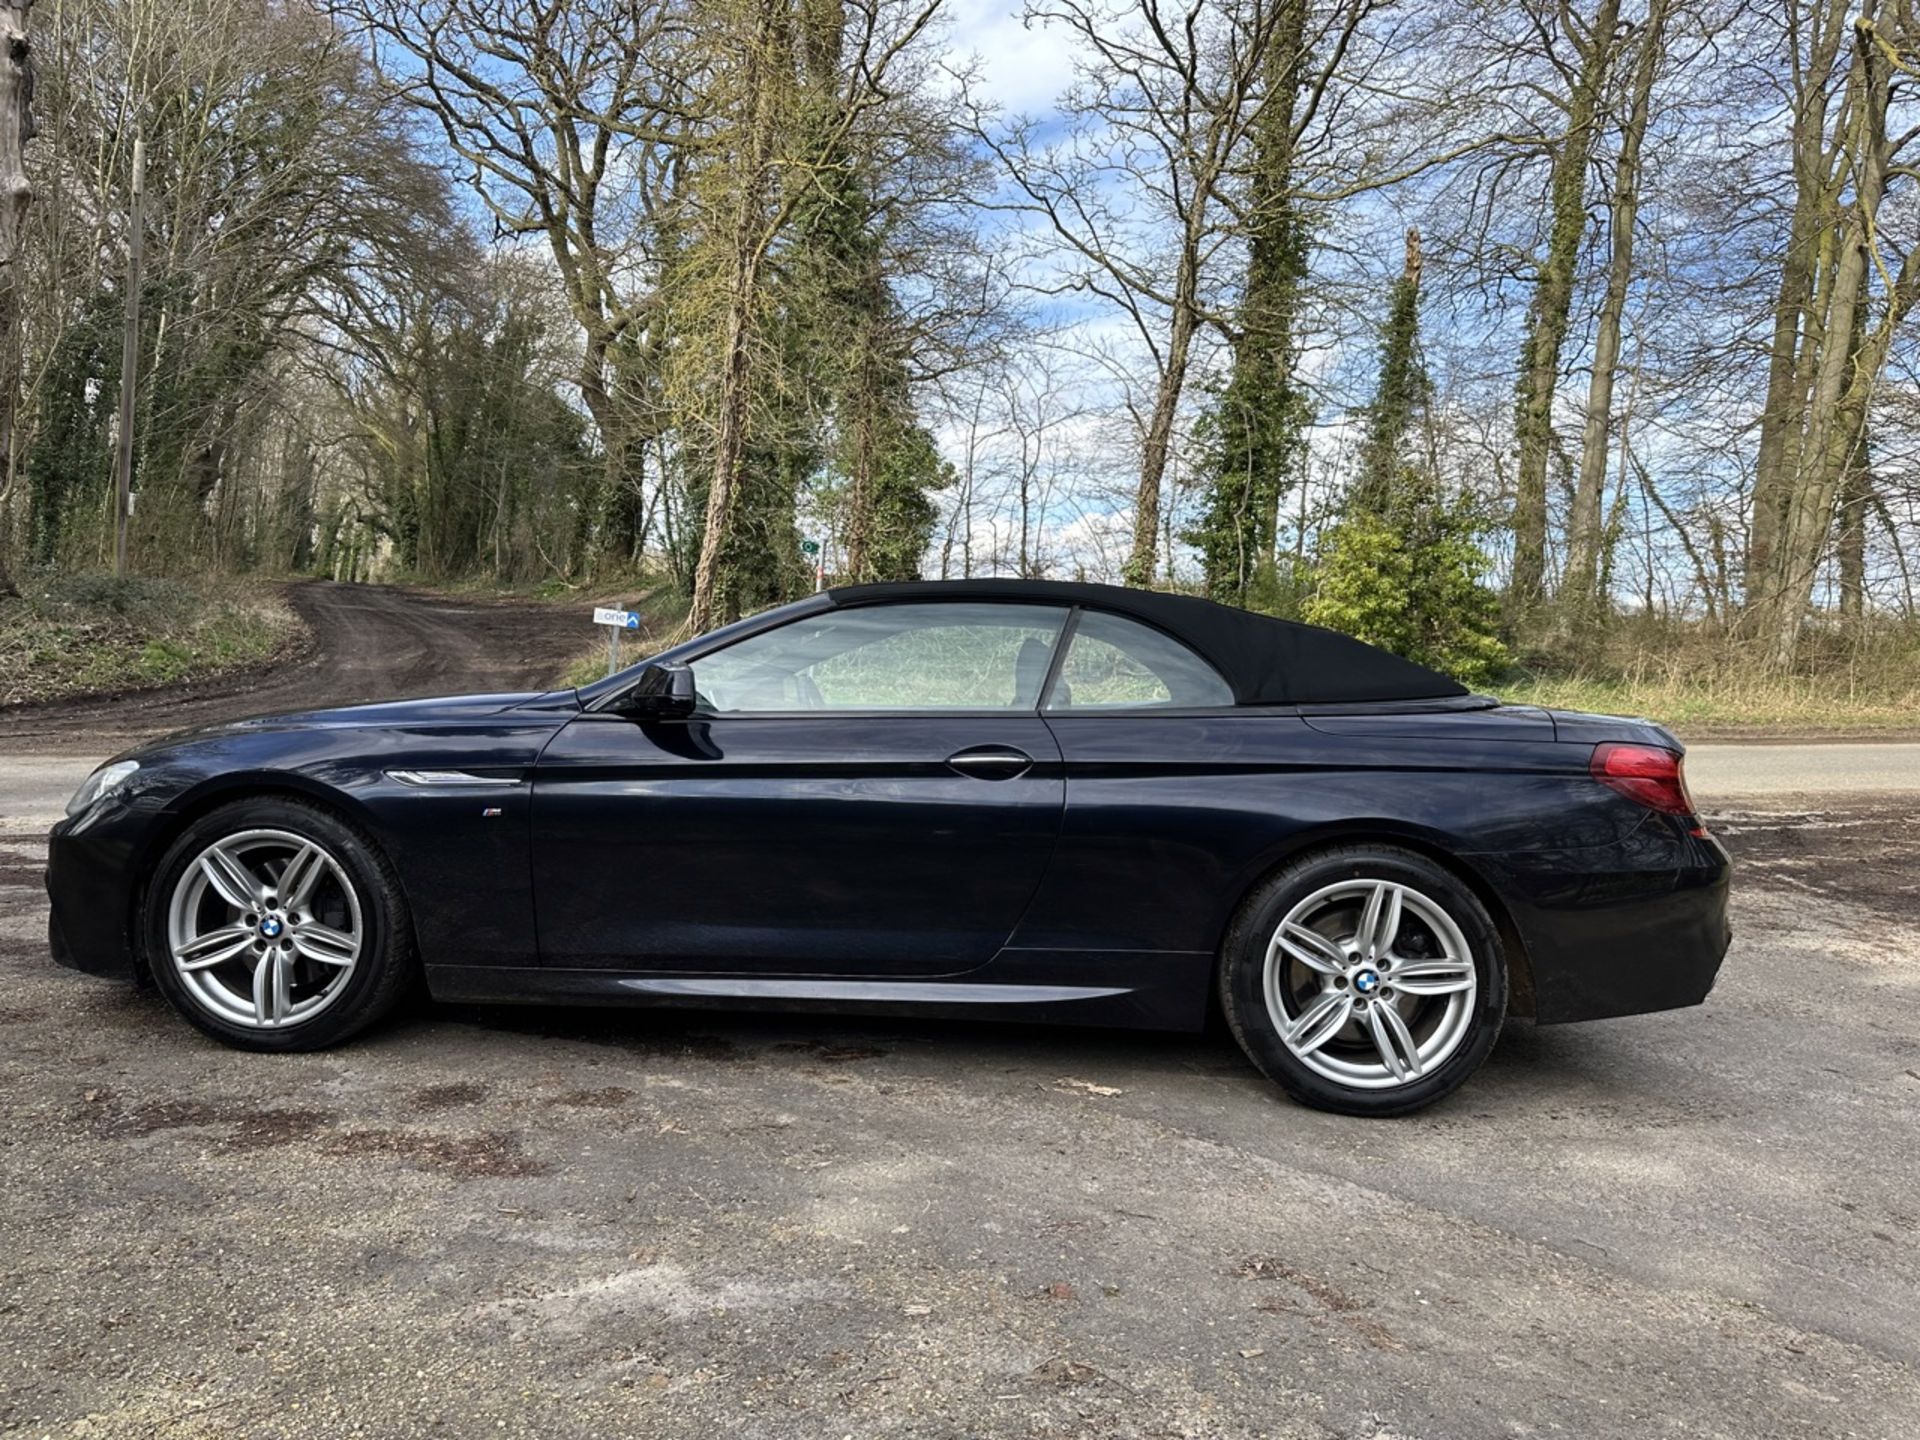 BMW 6 SERIES 640d (M SPORT) Ultimate Summer Car - AUTOMATIC - Convertible - 2014 - 3L Diesel - Image 5 of 18